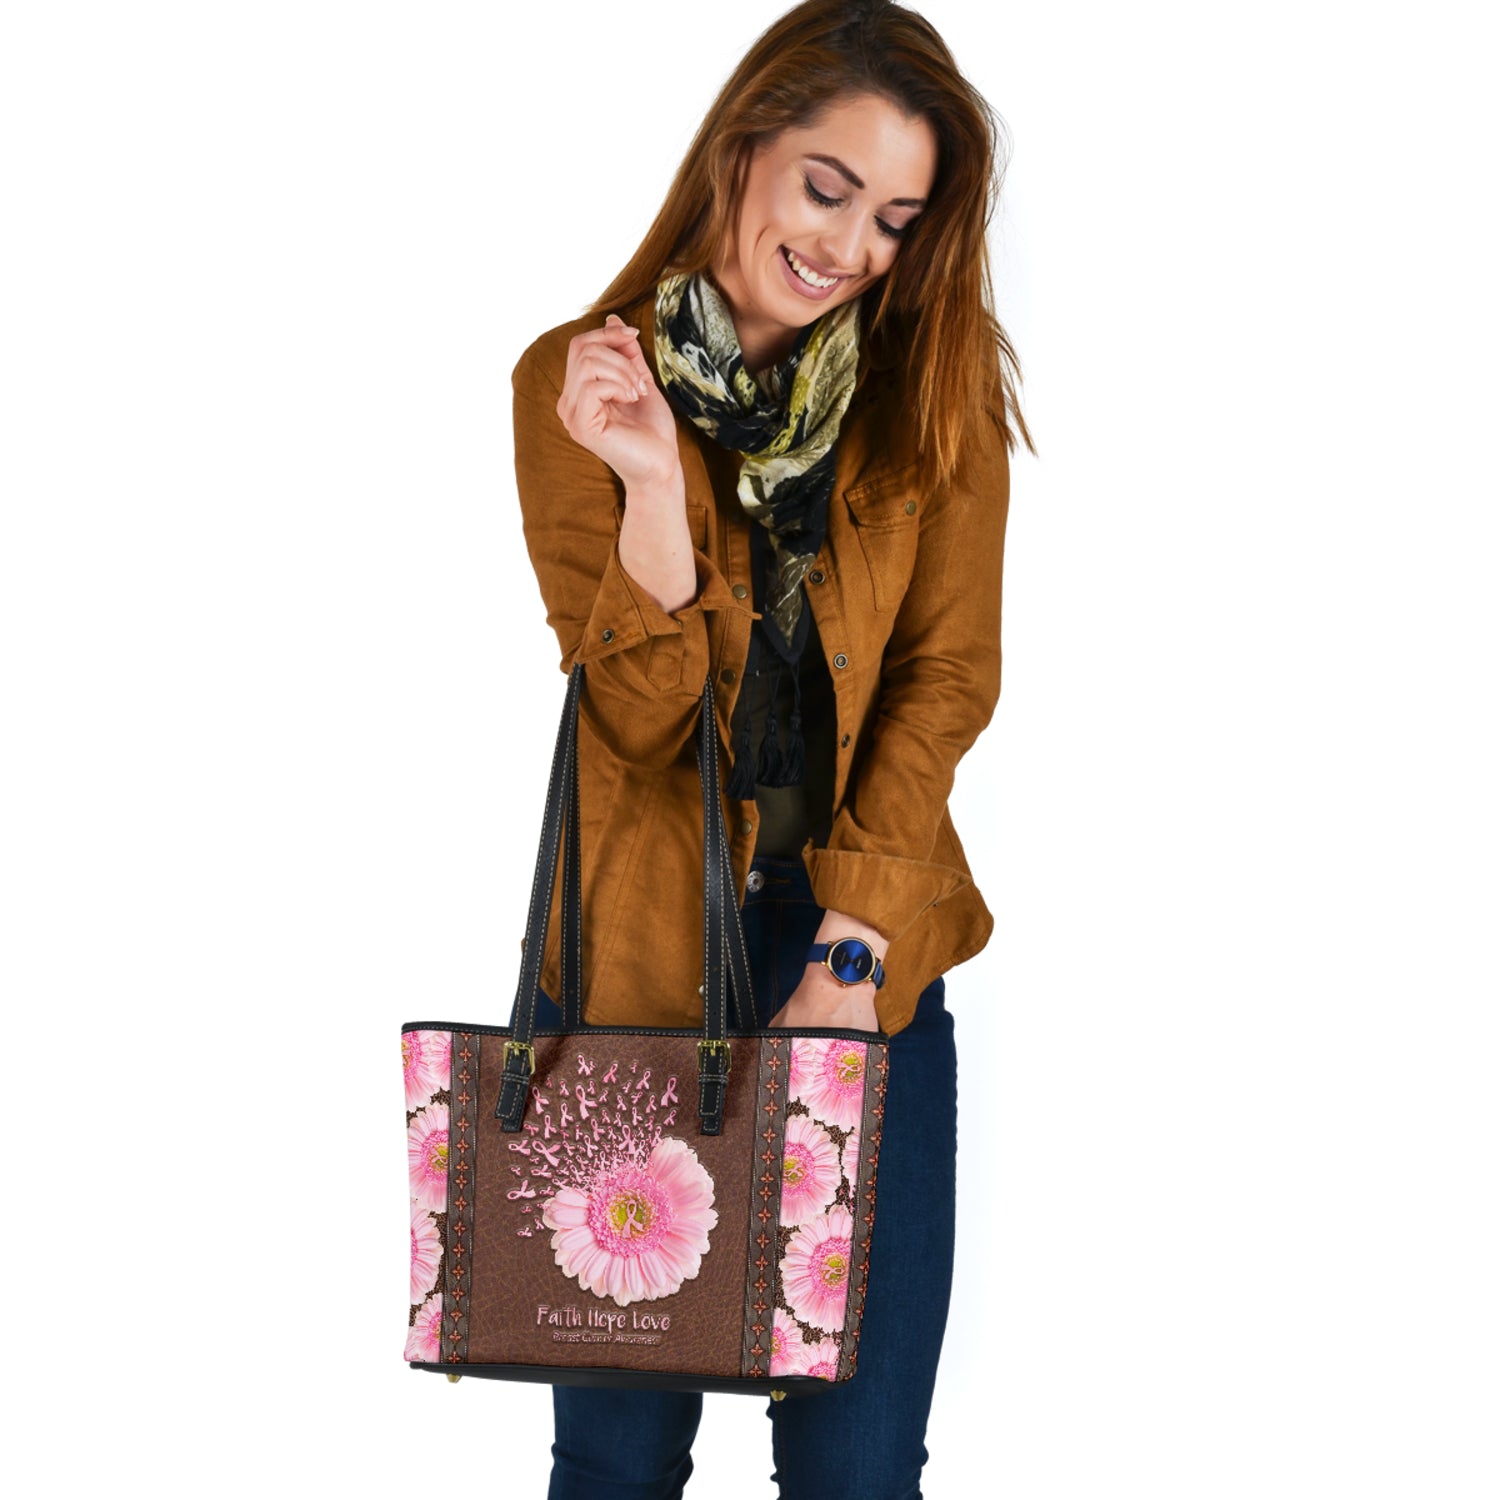 Faith Hope Love Breast Cancer Awareness Breast Cancer Awareness Leather Bag 0622